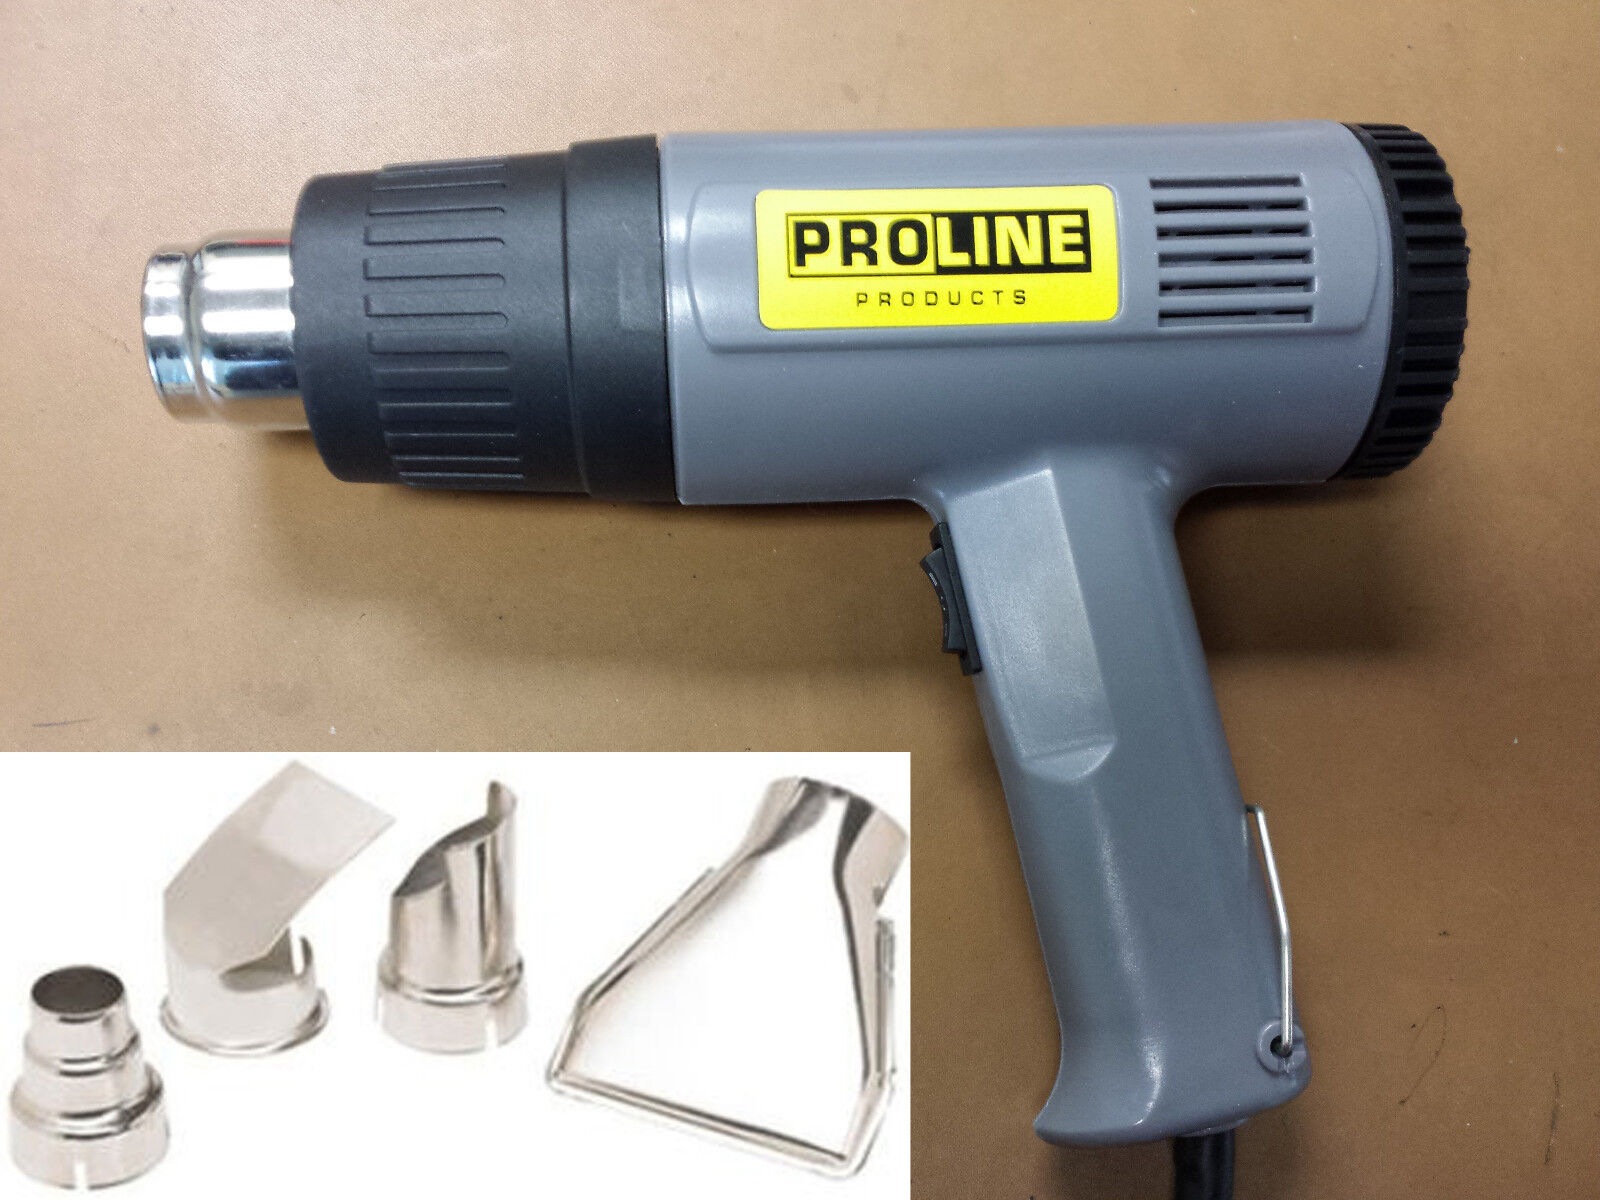 New Heat Gun ETL approved USA-standard 1500W with Dual Temperature+4 Accessories